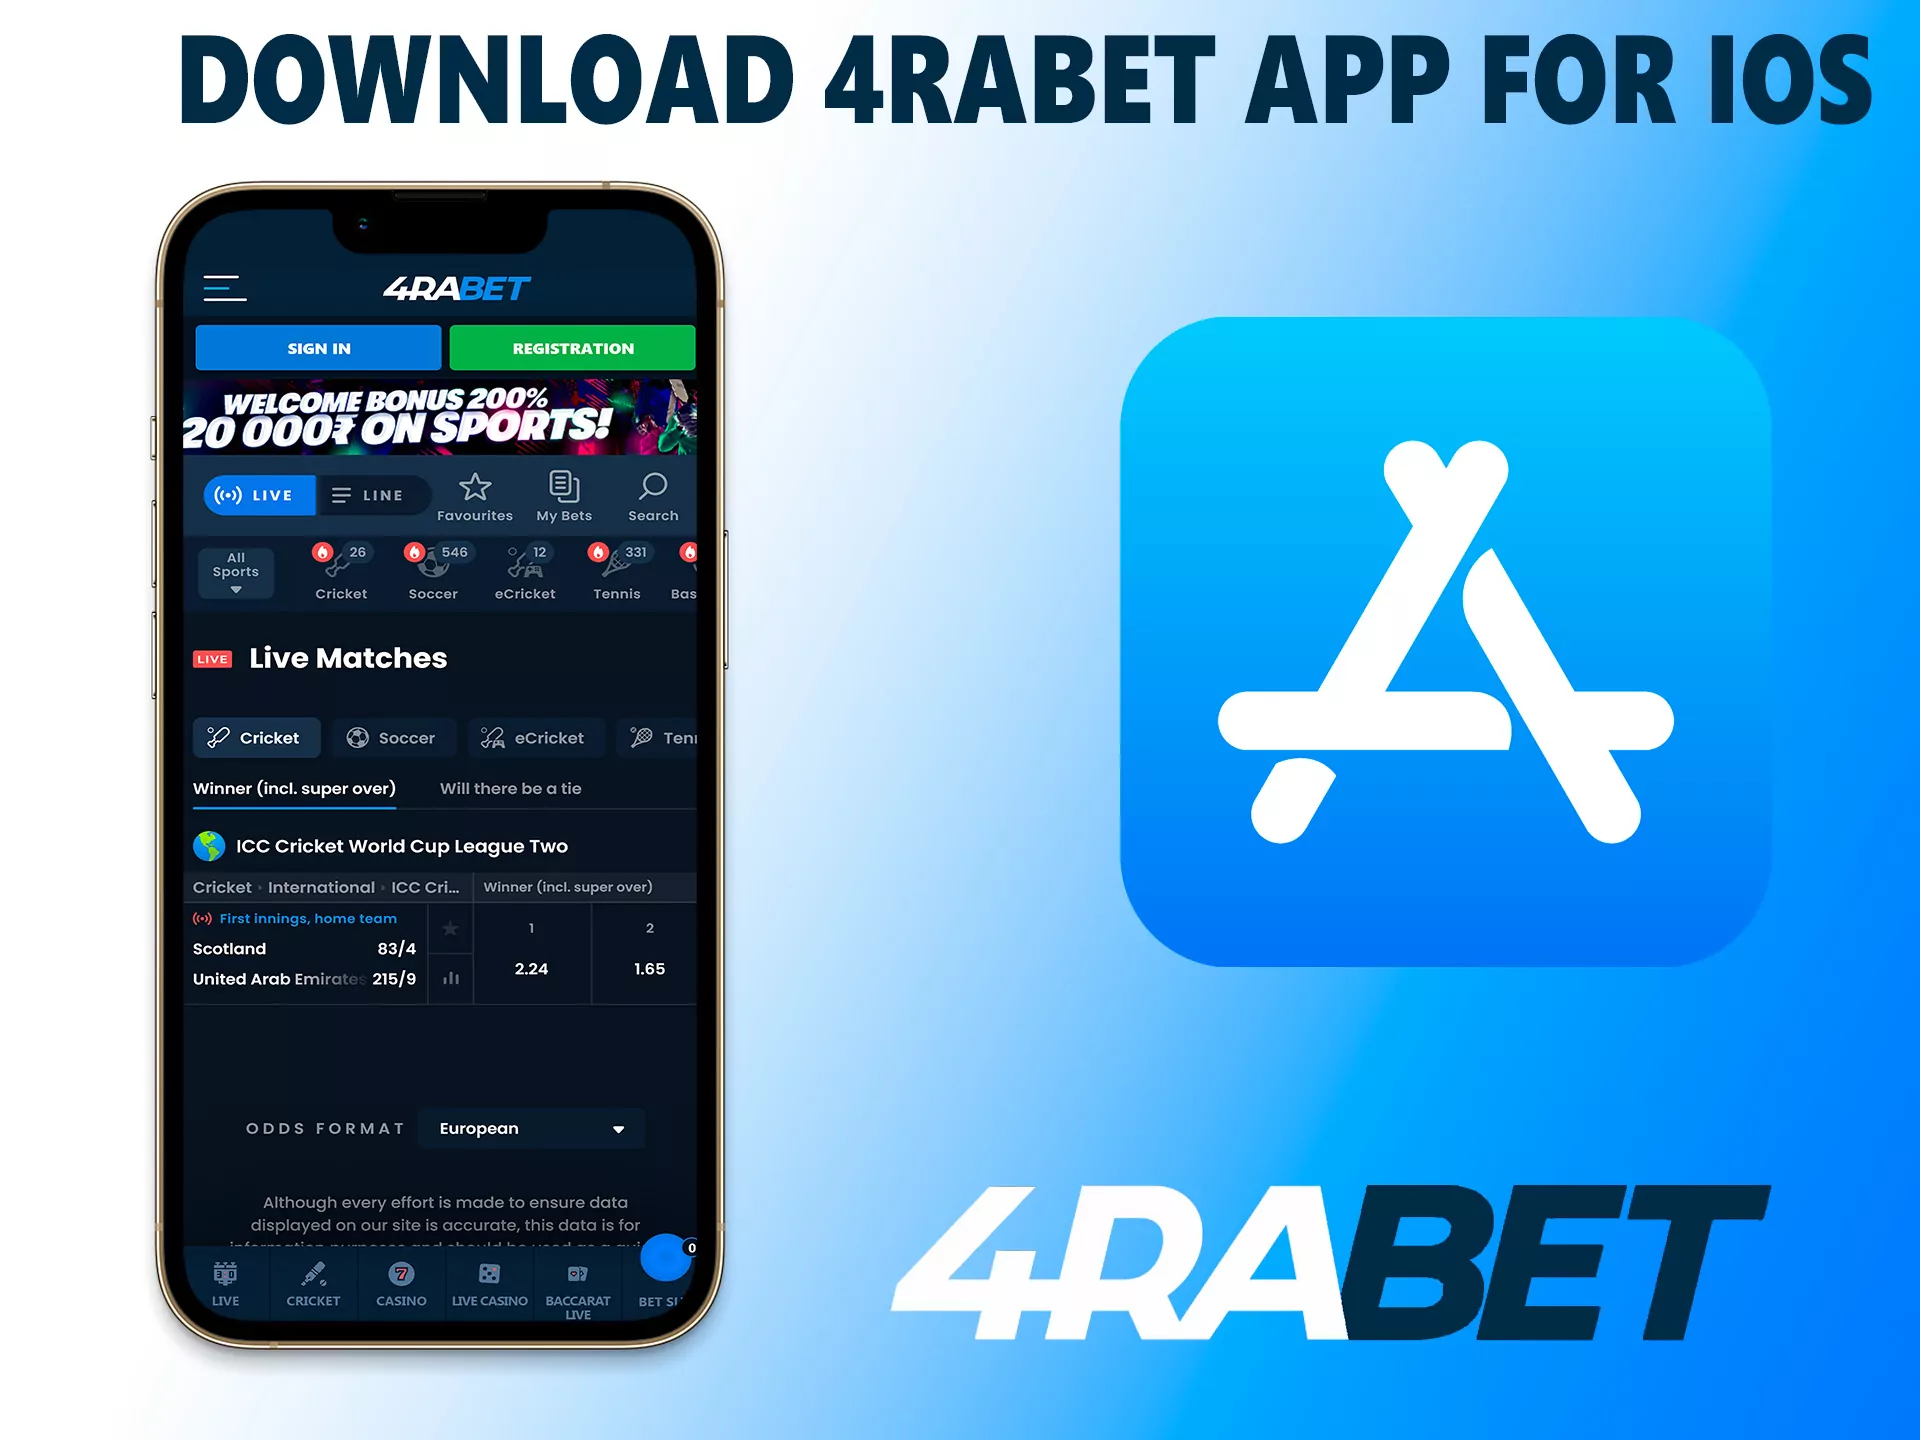 It is much easier to install the 4rabet app for IOS, it is available in the App Store, just follow our guide.